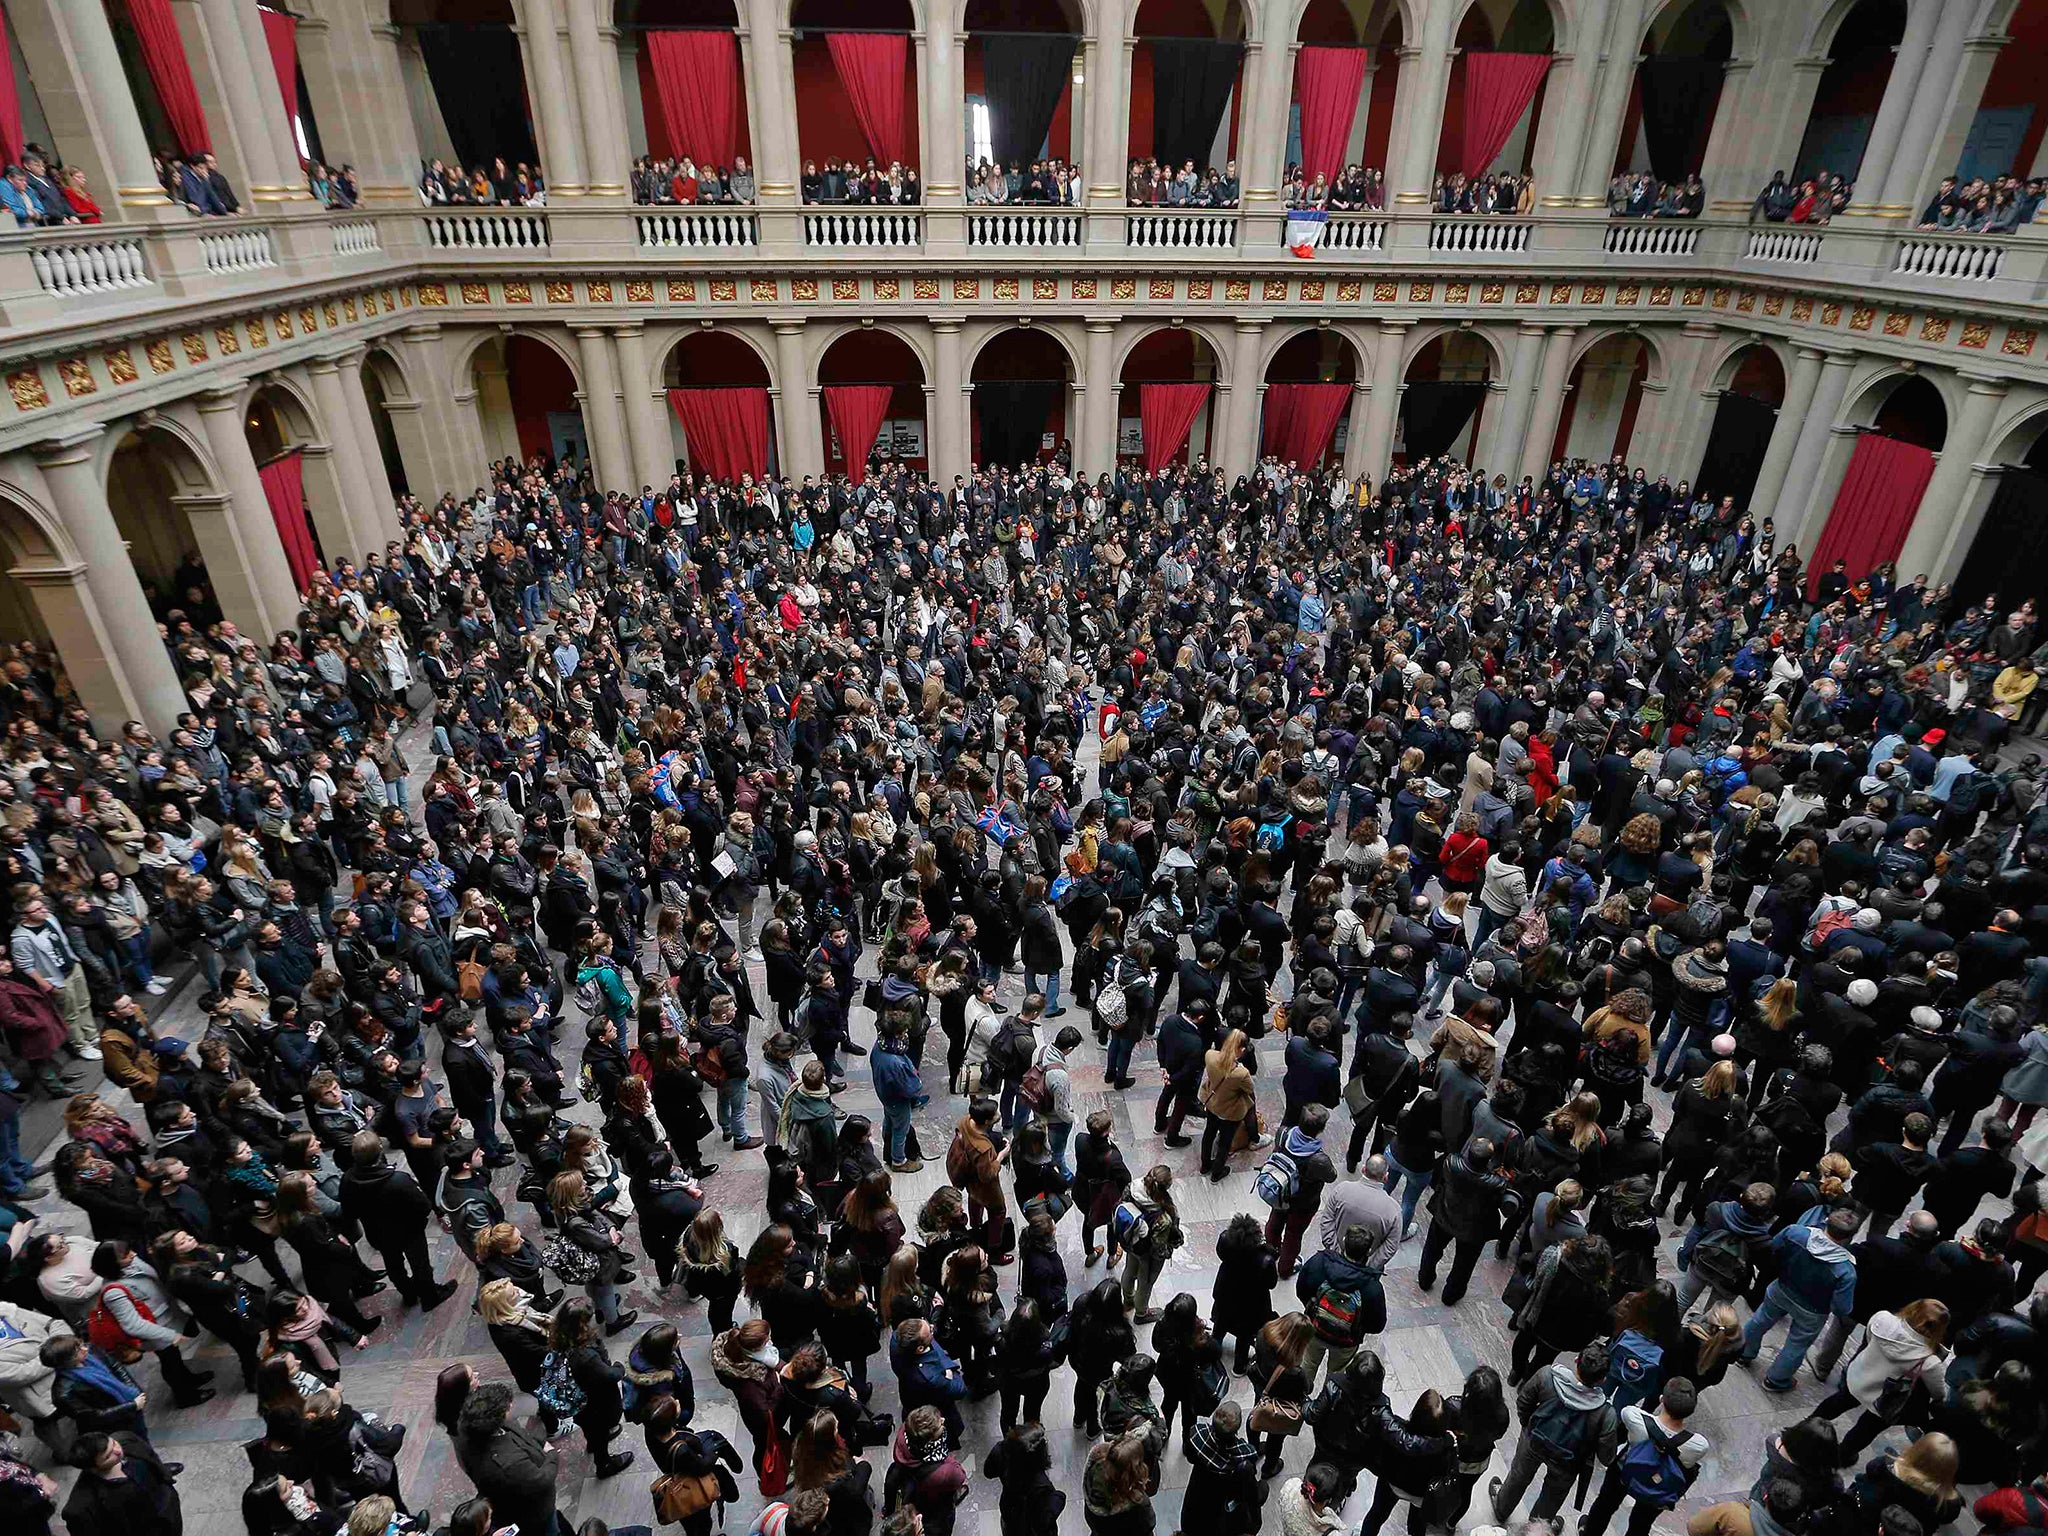 Students and teachers of Strasbourg University observe a minute of silence at the "Palais Universitaire" in Strasbourg, to pay tribute to victims of the Paris attacks